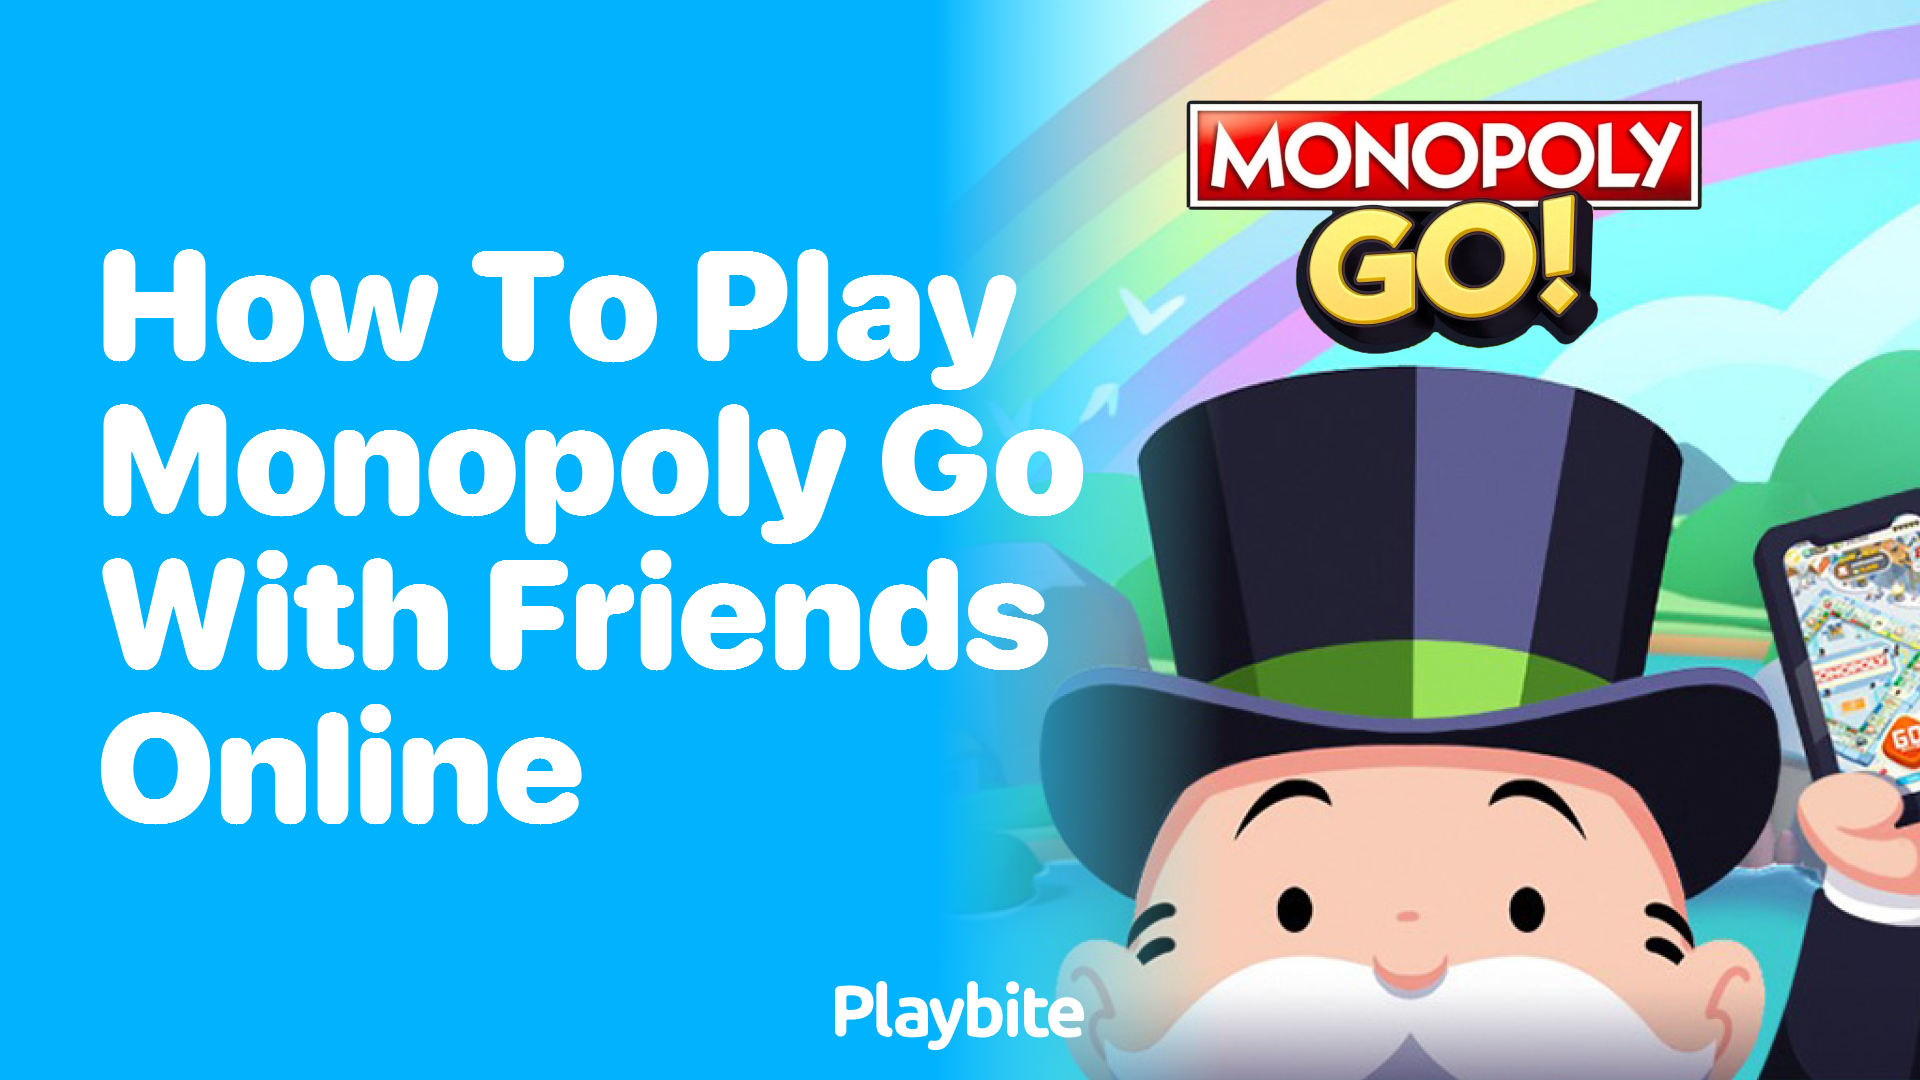 How to Play Monopoly Go with Friends Online